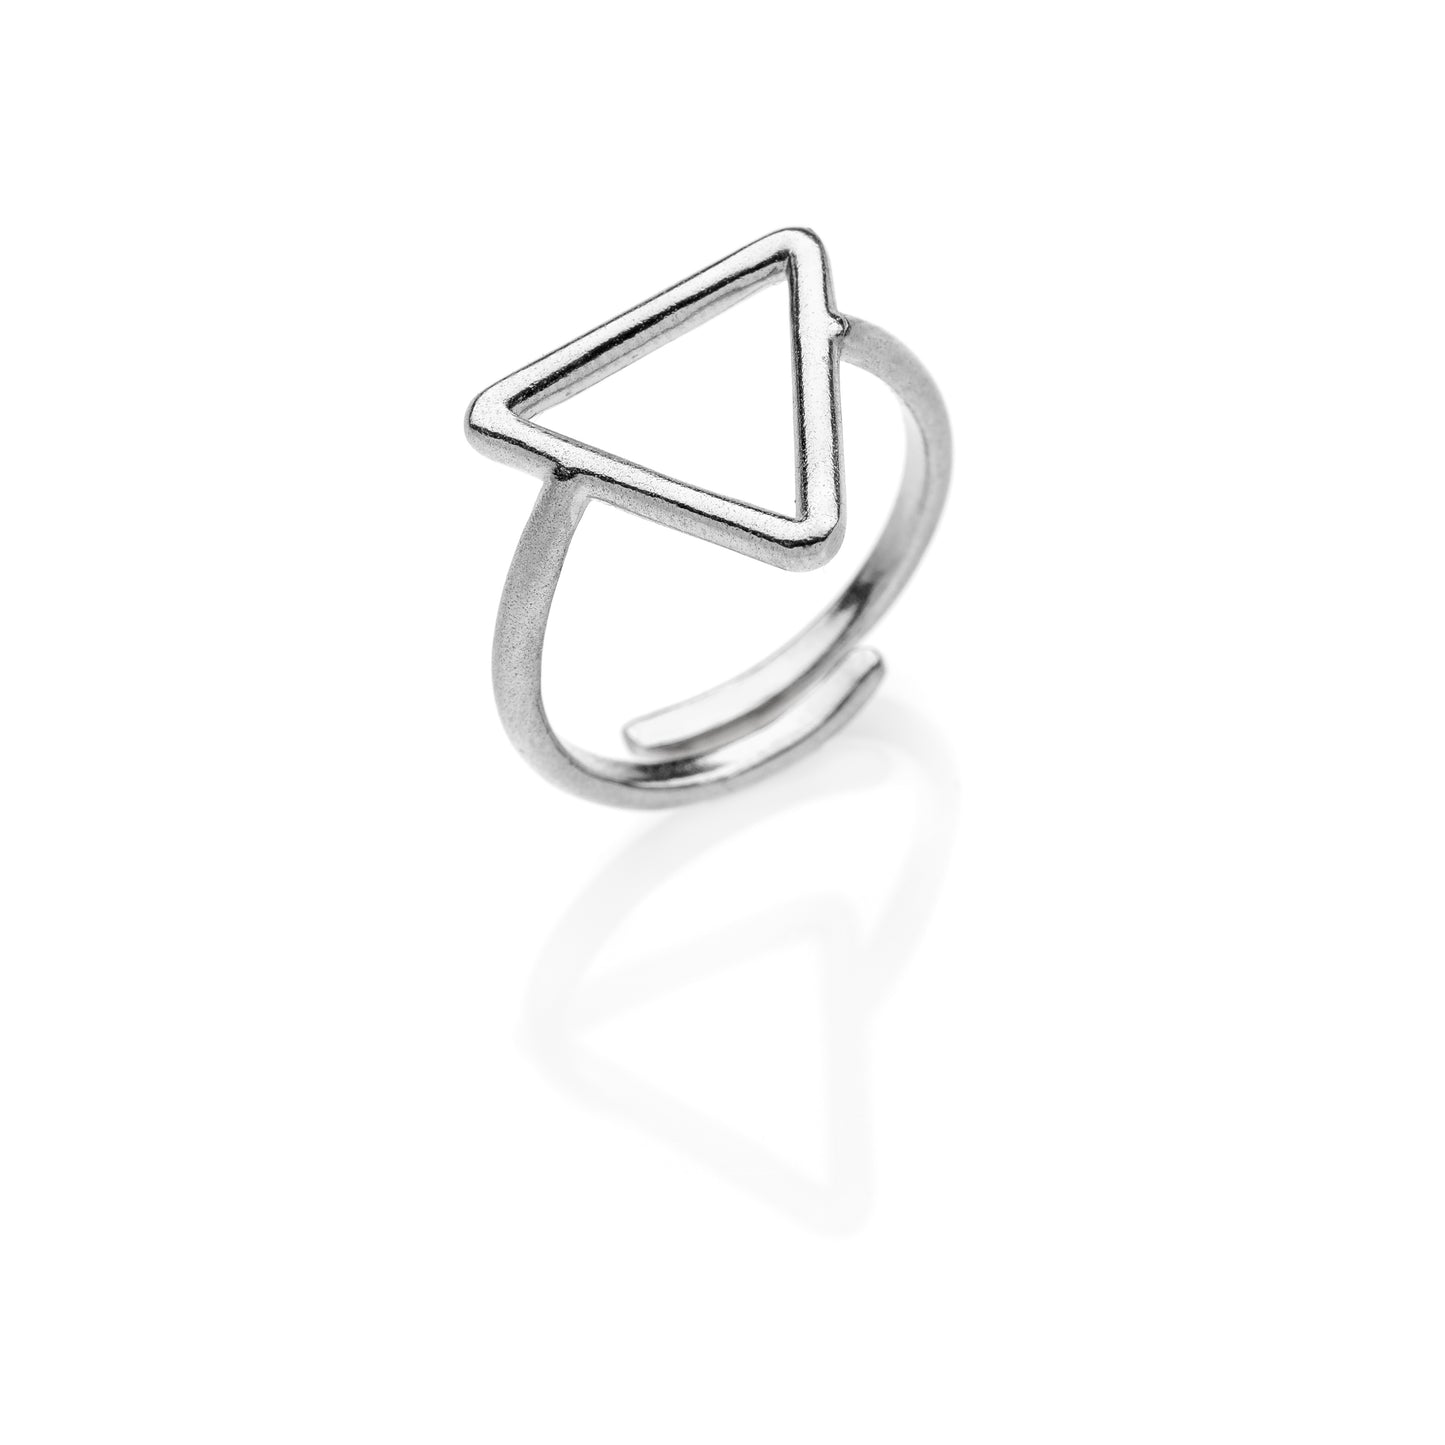 PITAGORA Triangle ring 925 sterling silver #MS061AN - MARIA SALVADOR